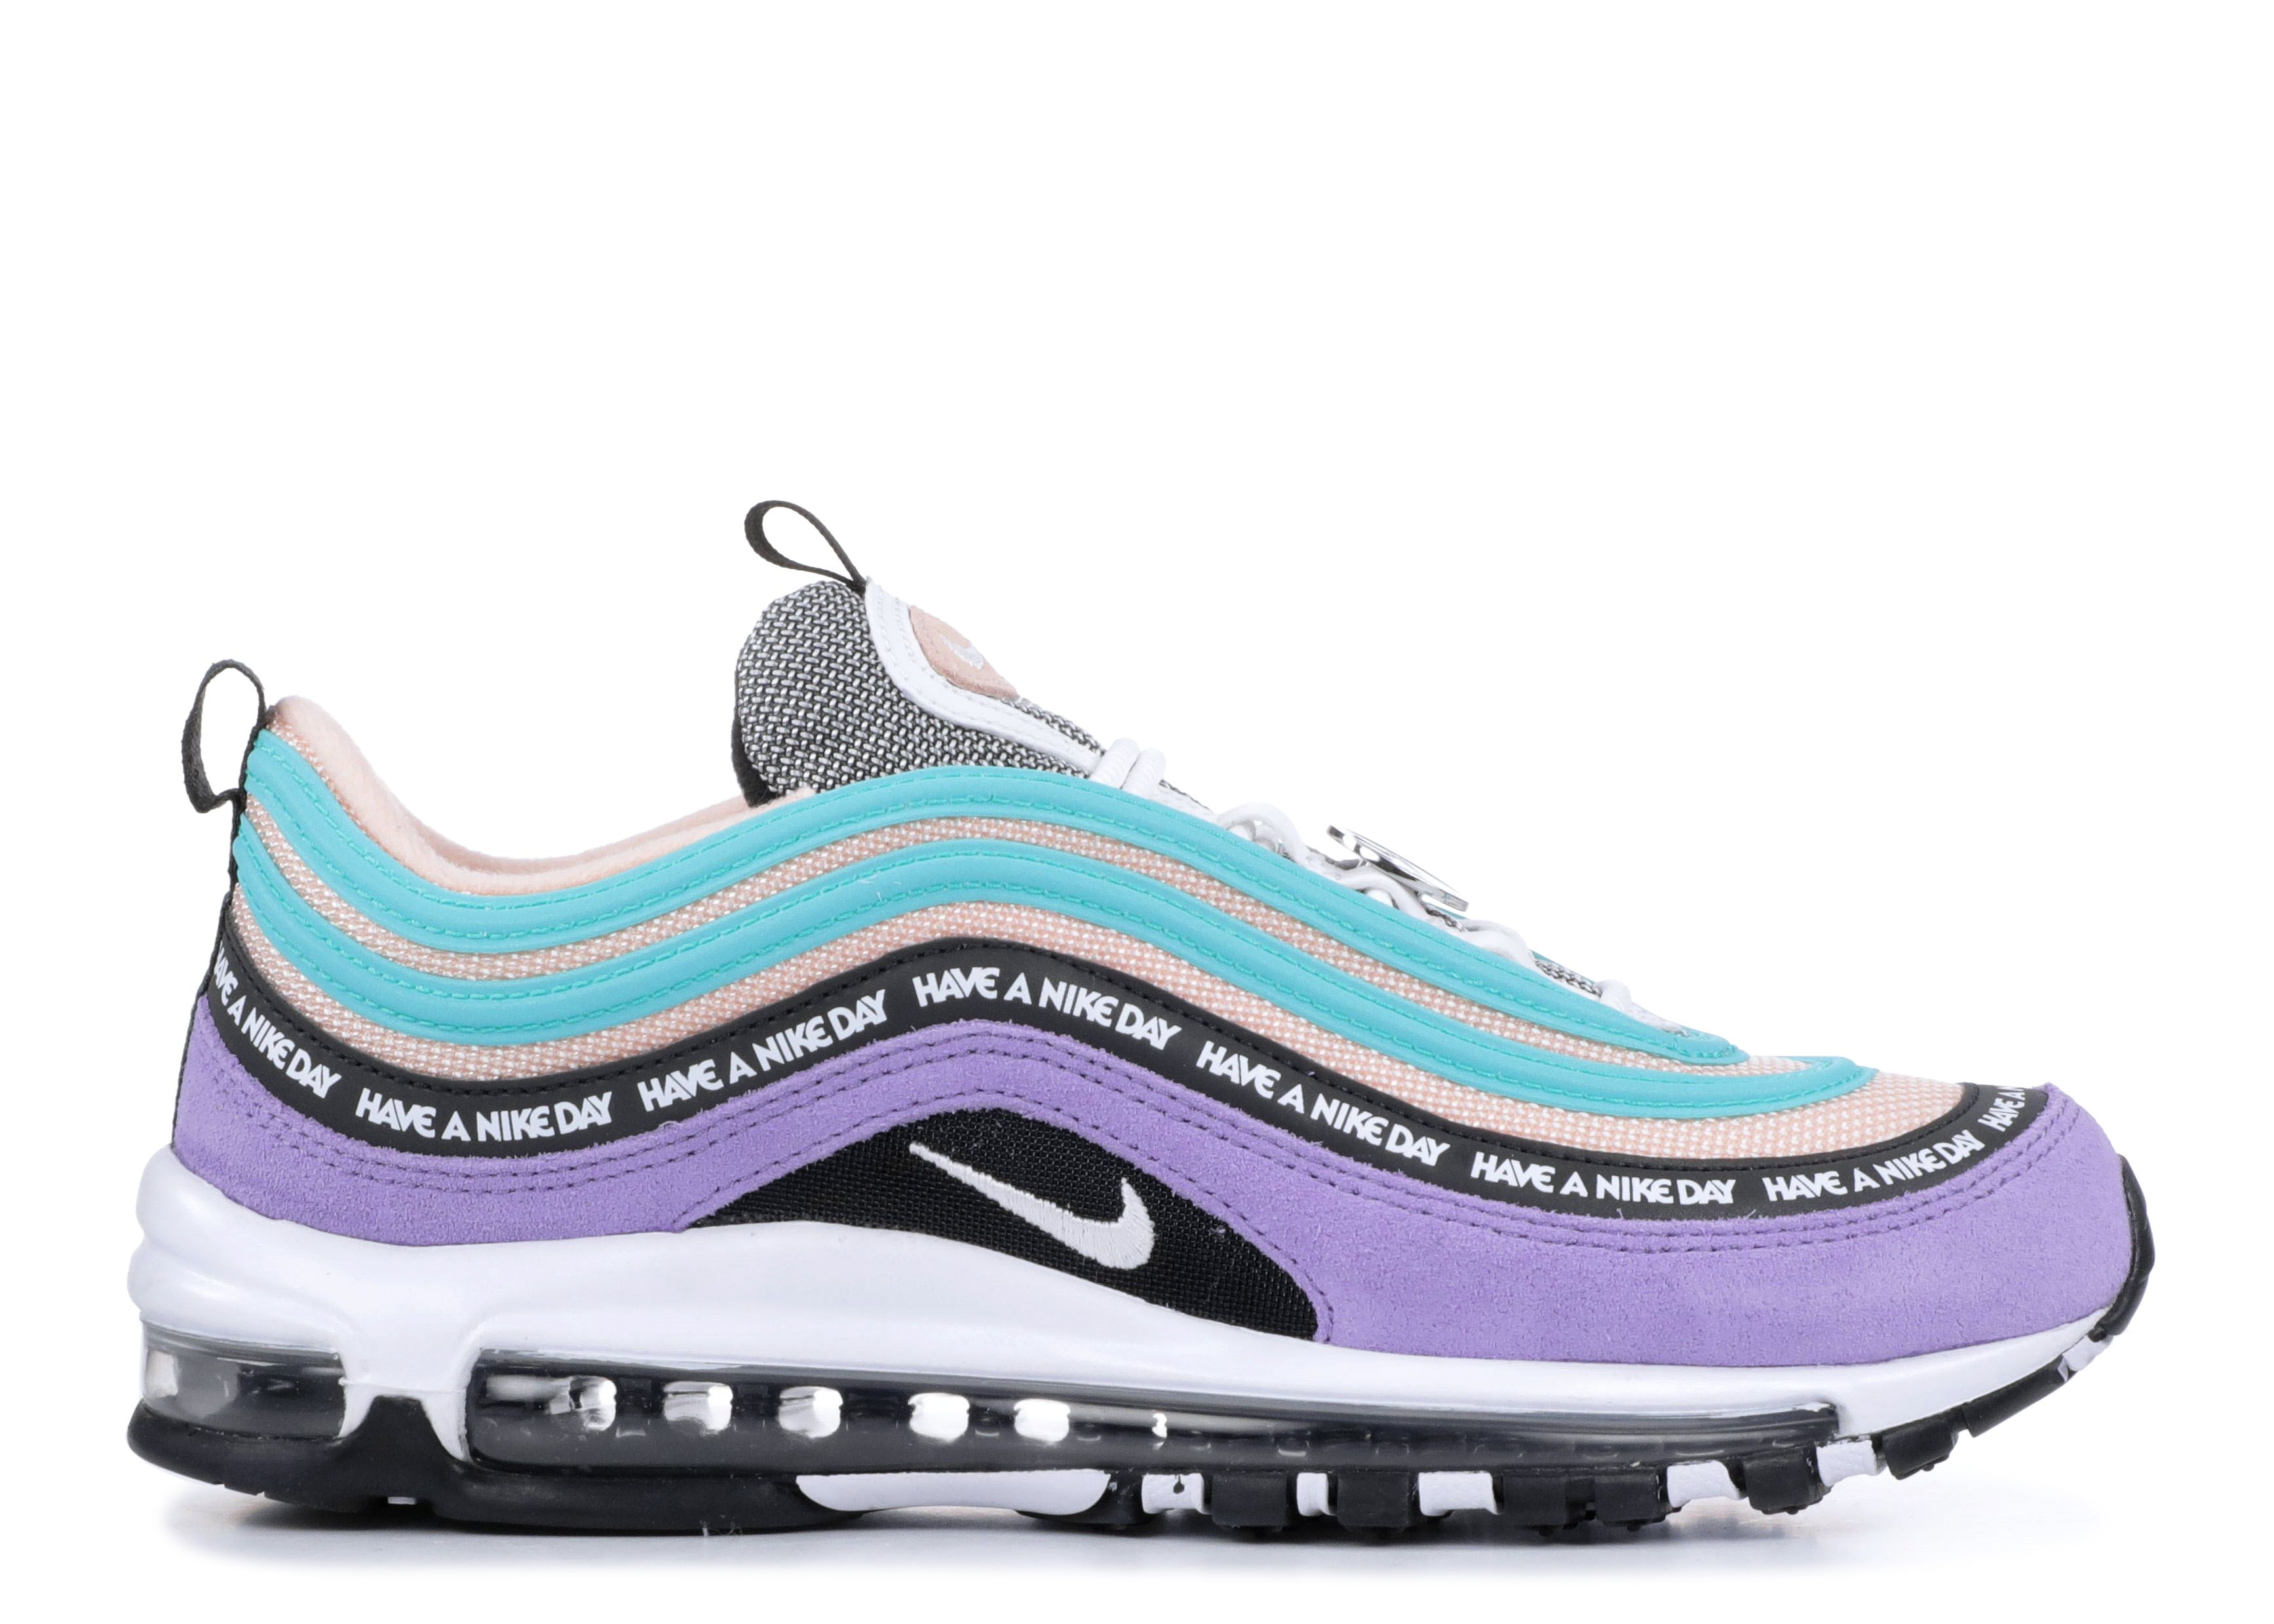 Air Max 97 'Have a Nike Day'